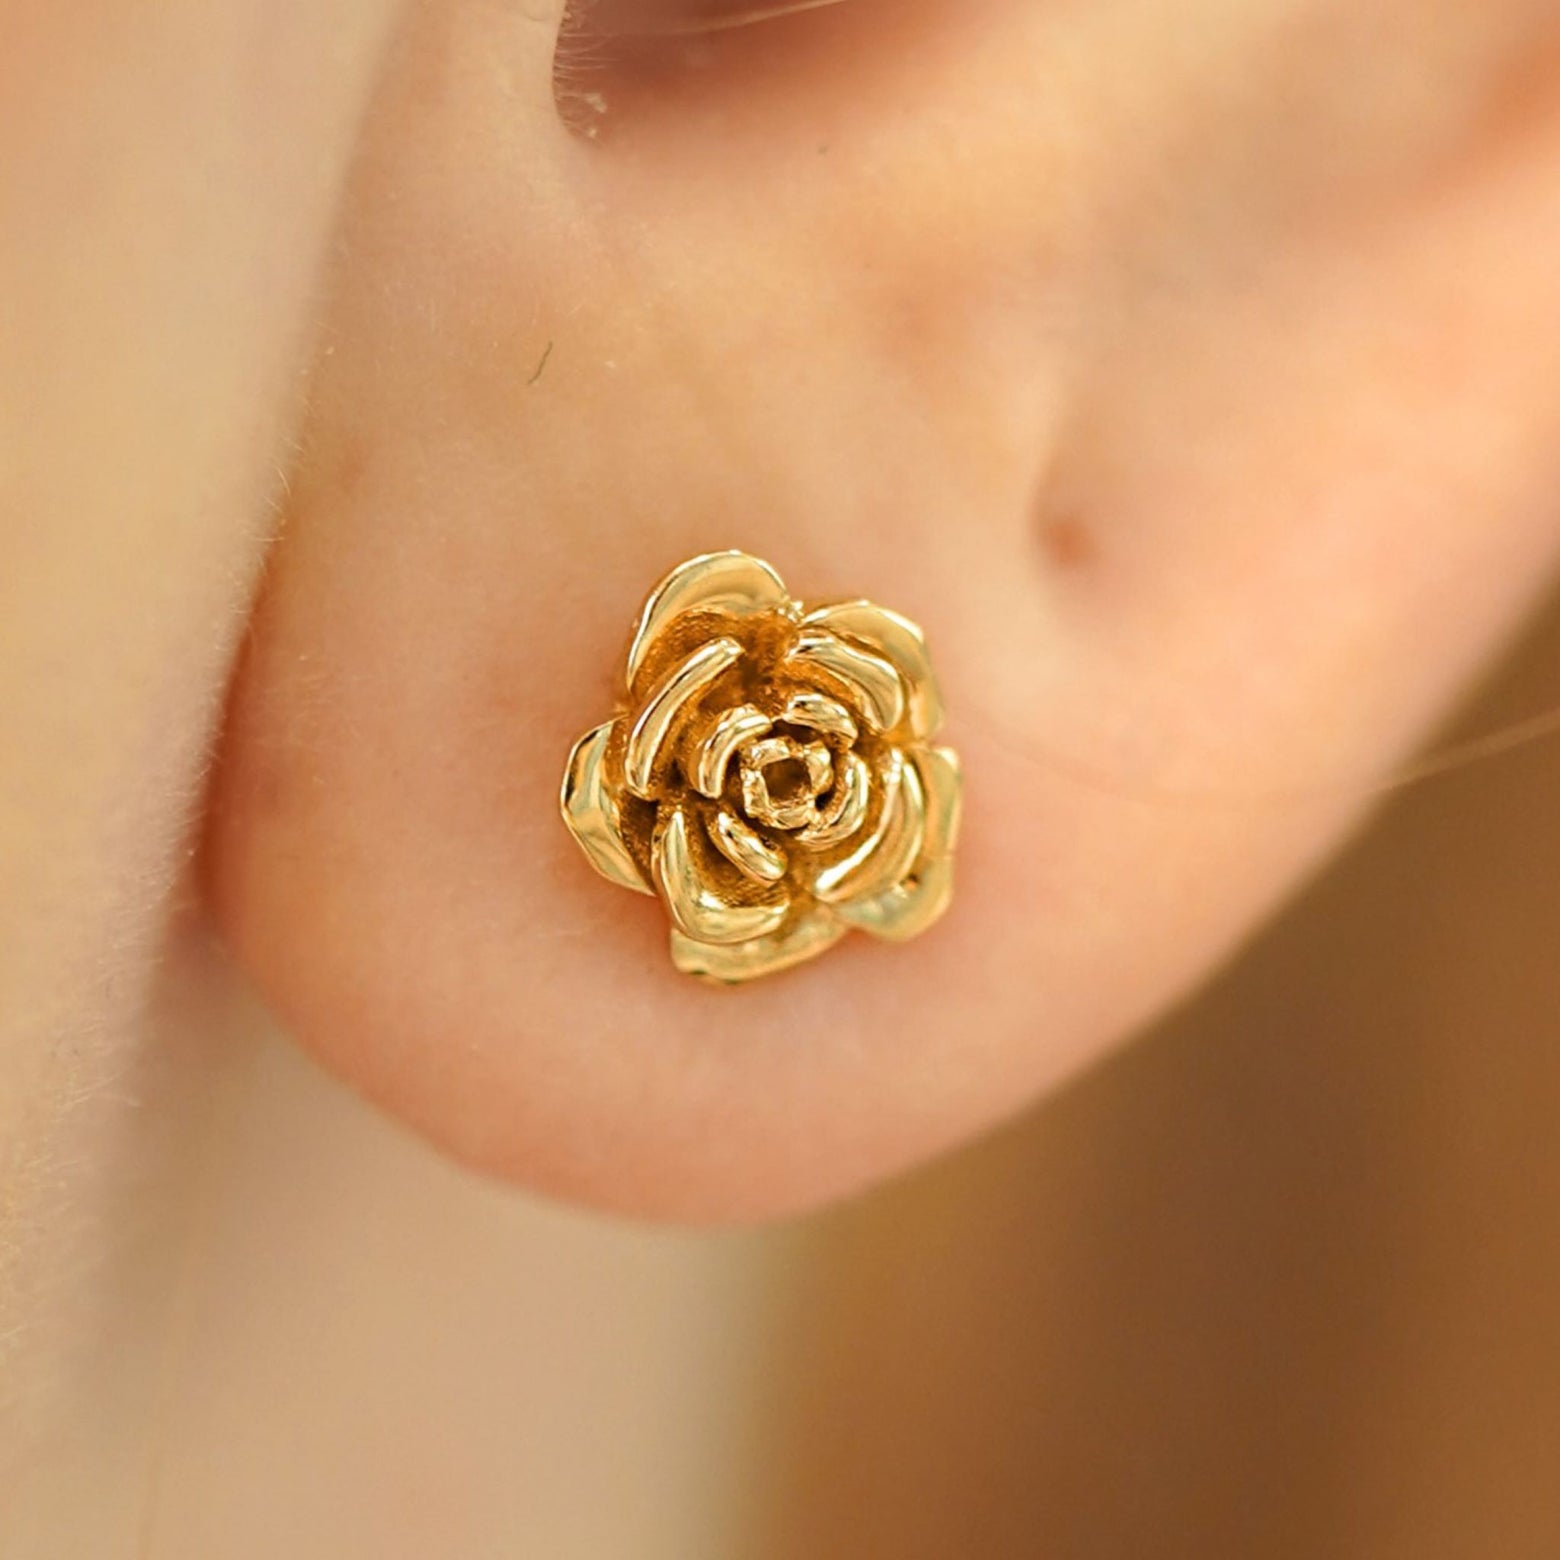 Close up view of a model's ear wearing a 14k yellow gold Rose Earring